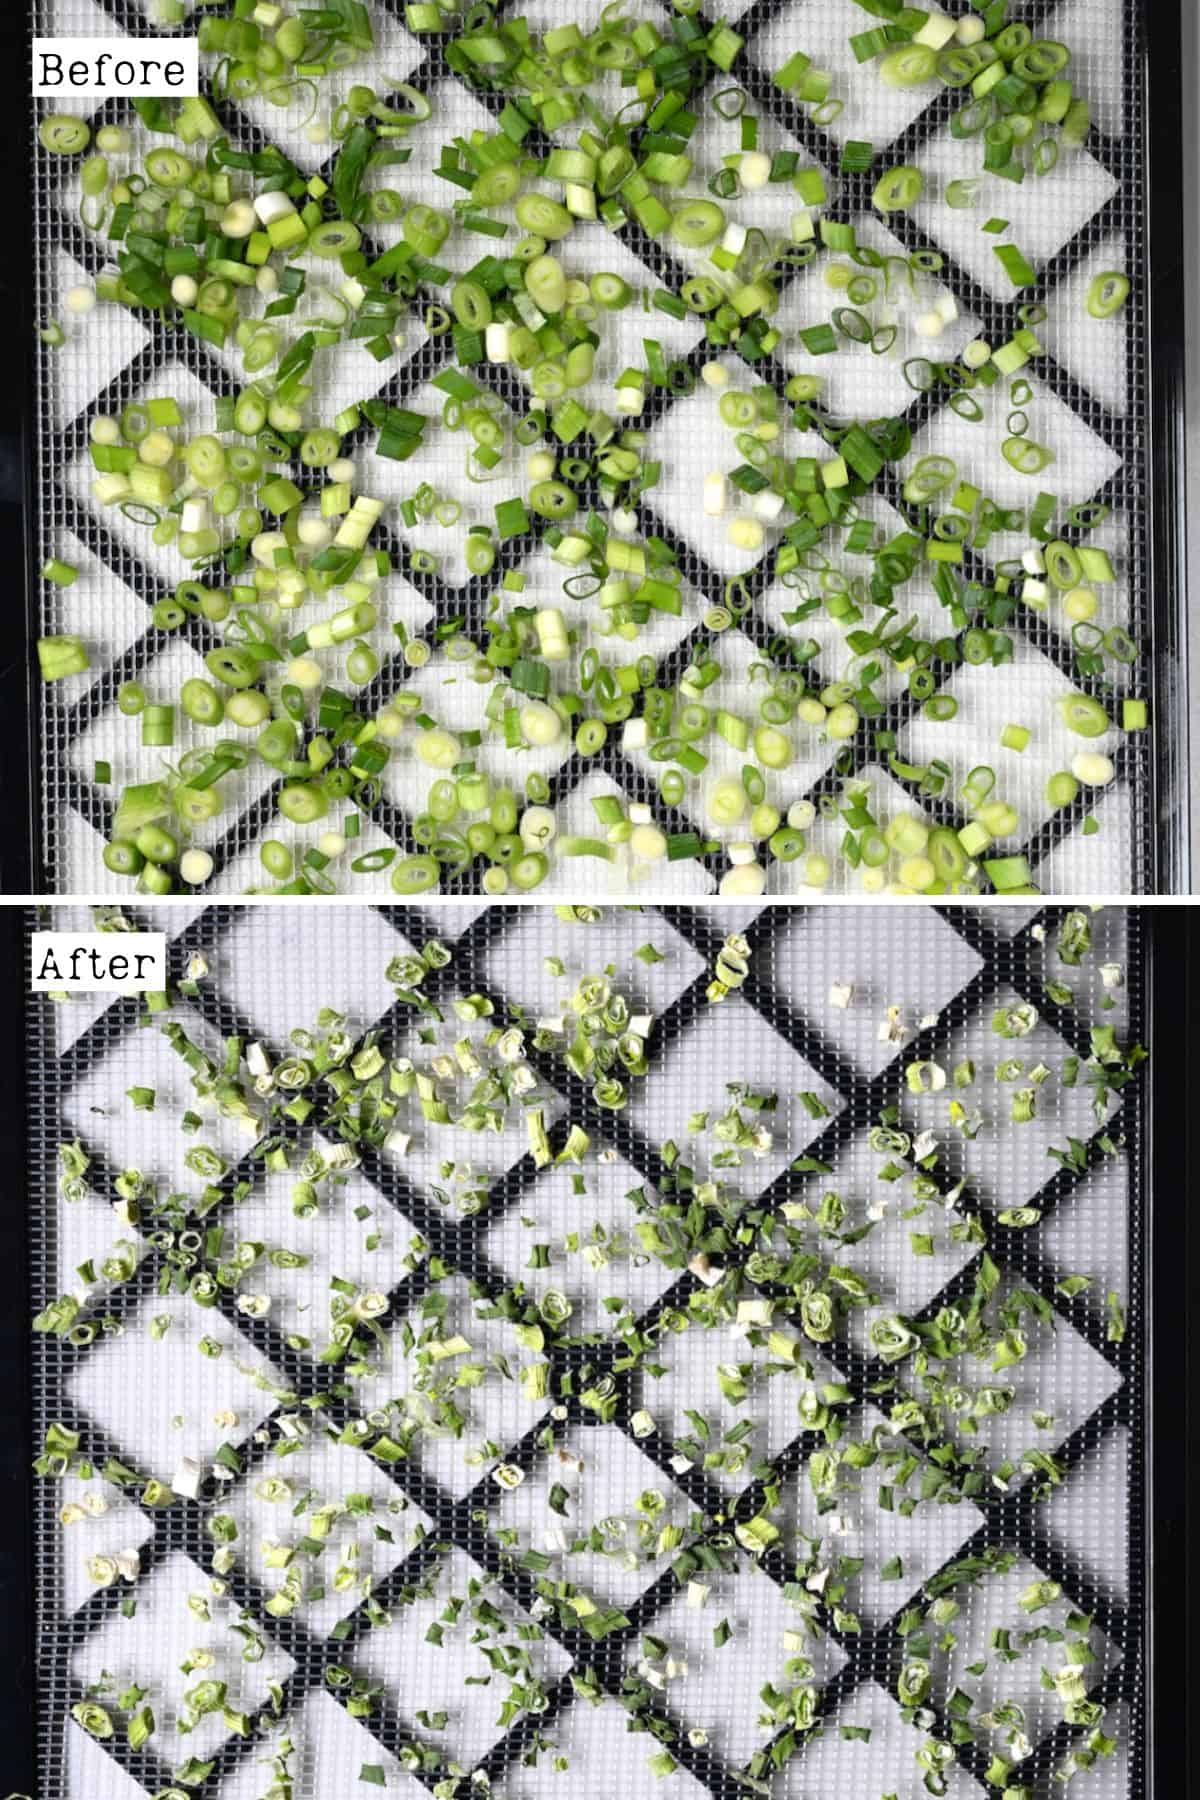 Before and after dehydrating green onions